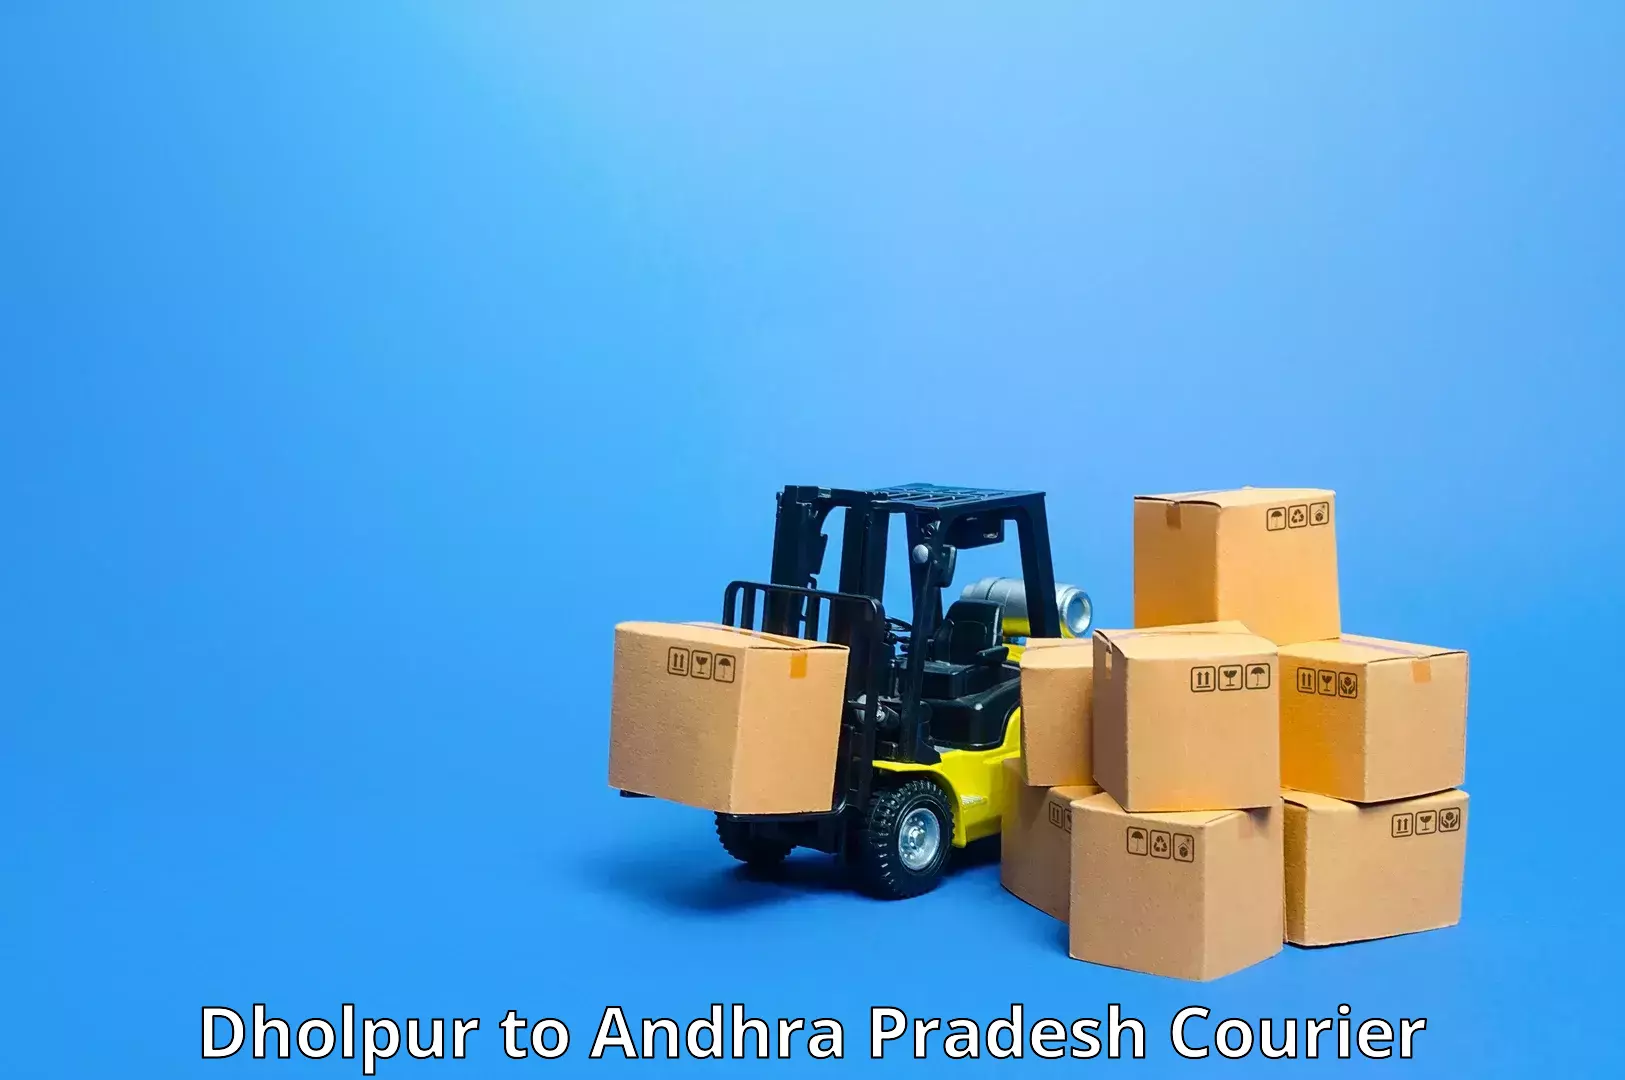 Track and trace shipping in Dholpur to Rajahmundry